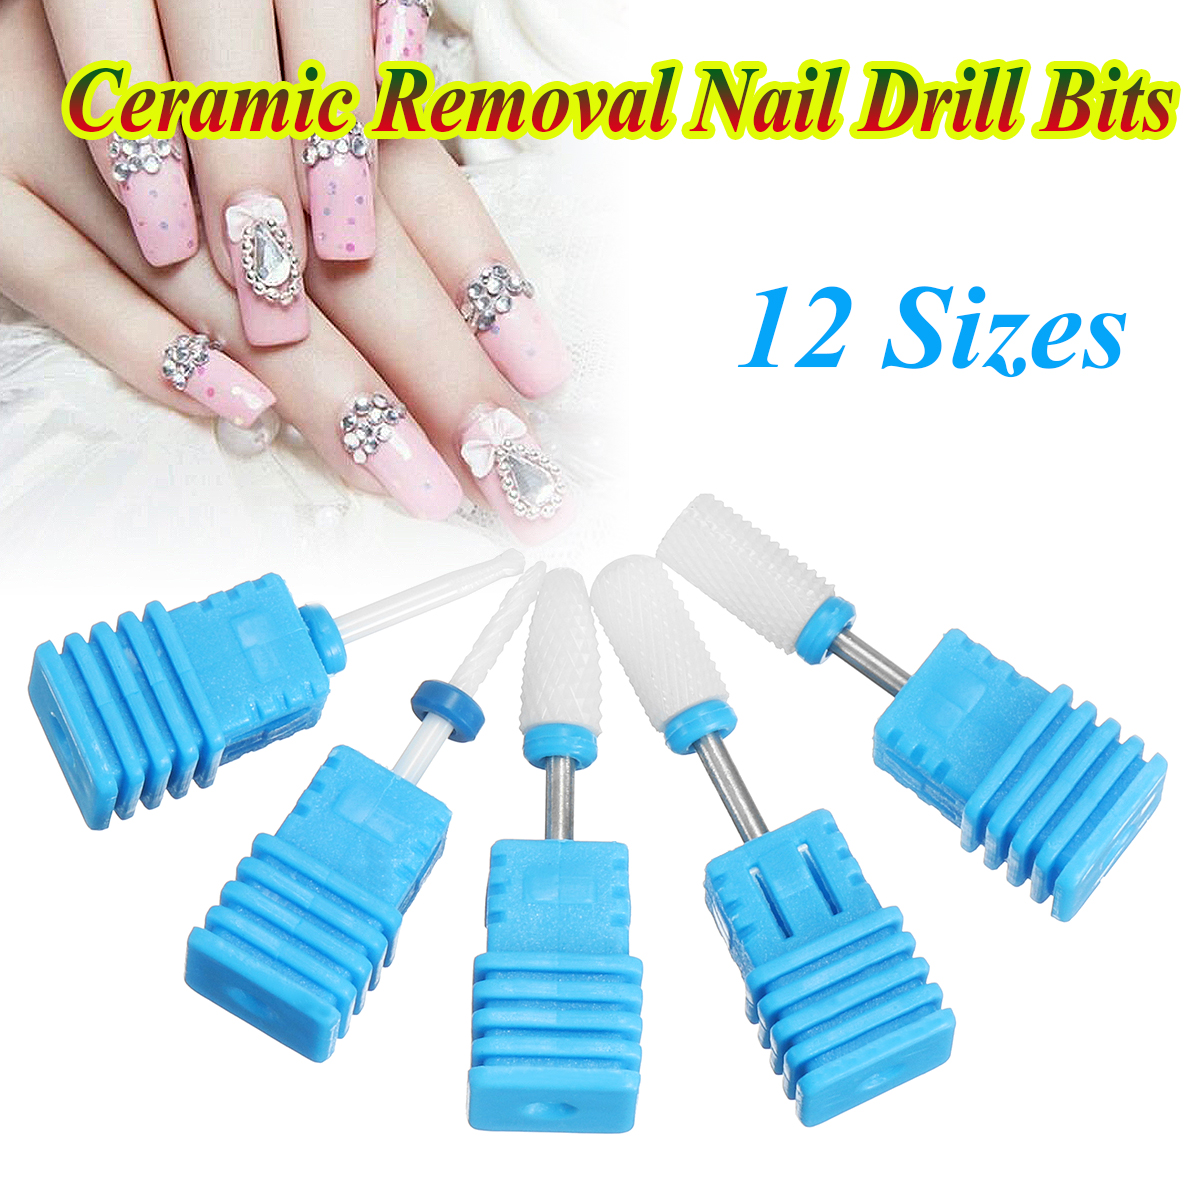 Ceramic-Beauty-Gel-Removal-Nail-Drill-Bits-Manicure-Tools-Cuticle-Cleaner-1386849